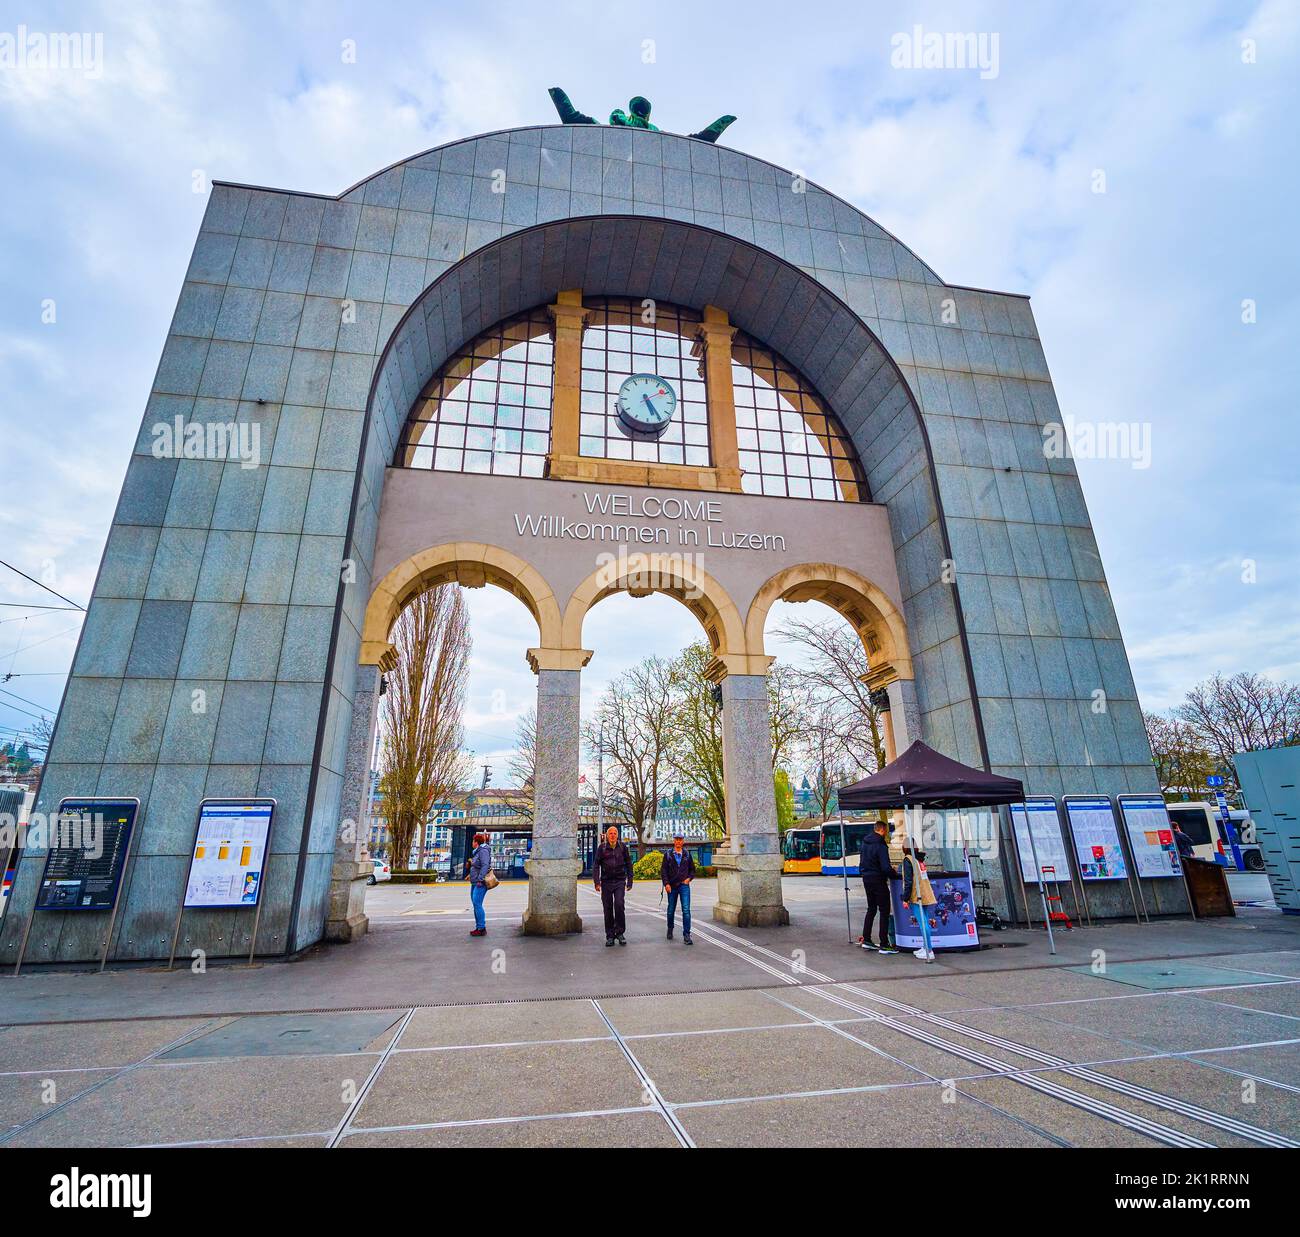 LUCERNE, SWITZERLAND - MARCH 30, 2022: The modern backside of historical arch with welcoming sign in front of Lucerne Railway Station, on March 30 in Stock Photo